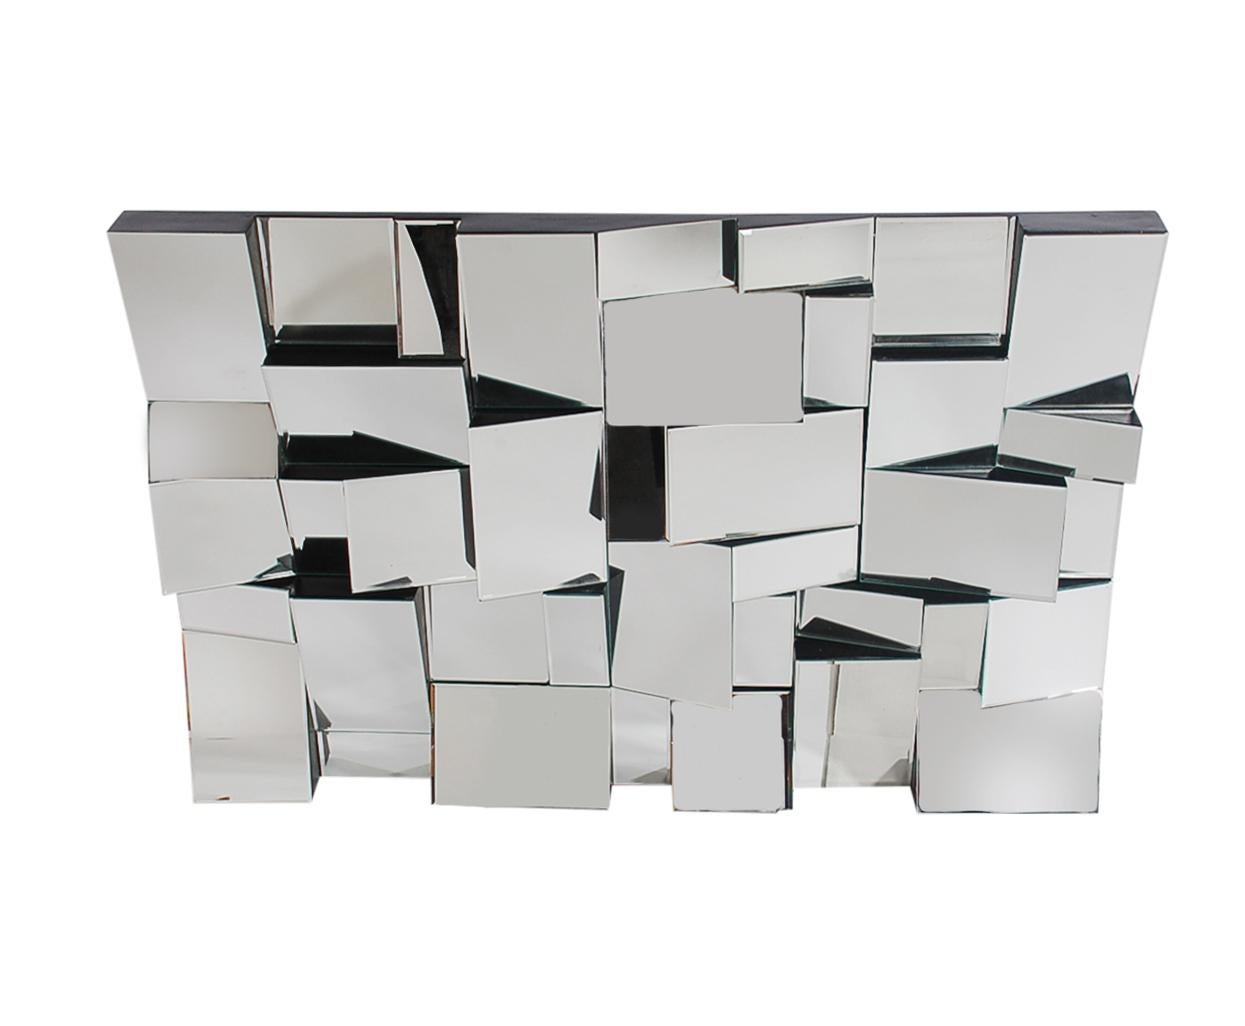 A large and impressive wall mirror designed by Neal Small and produced in the 1970s. It features solid wood construction, black edge frame, and several individual mirrors at different angles. A true focal point of any room.
  